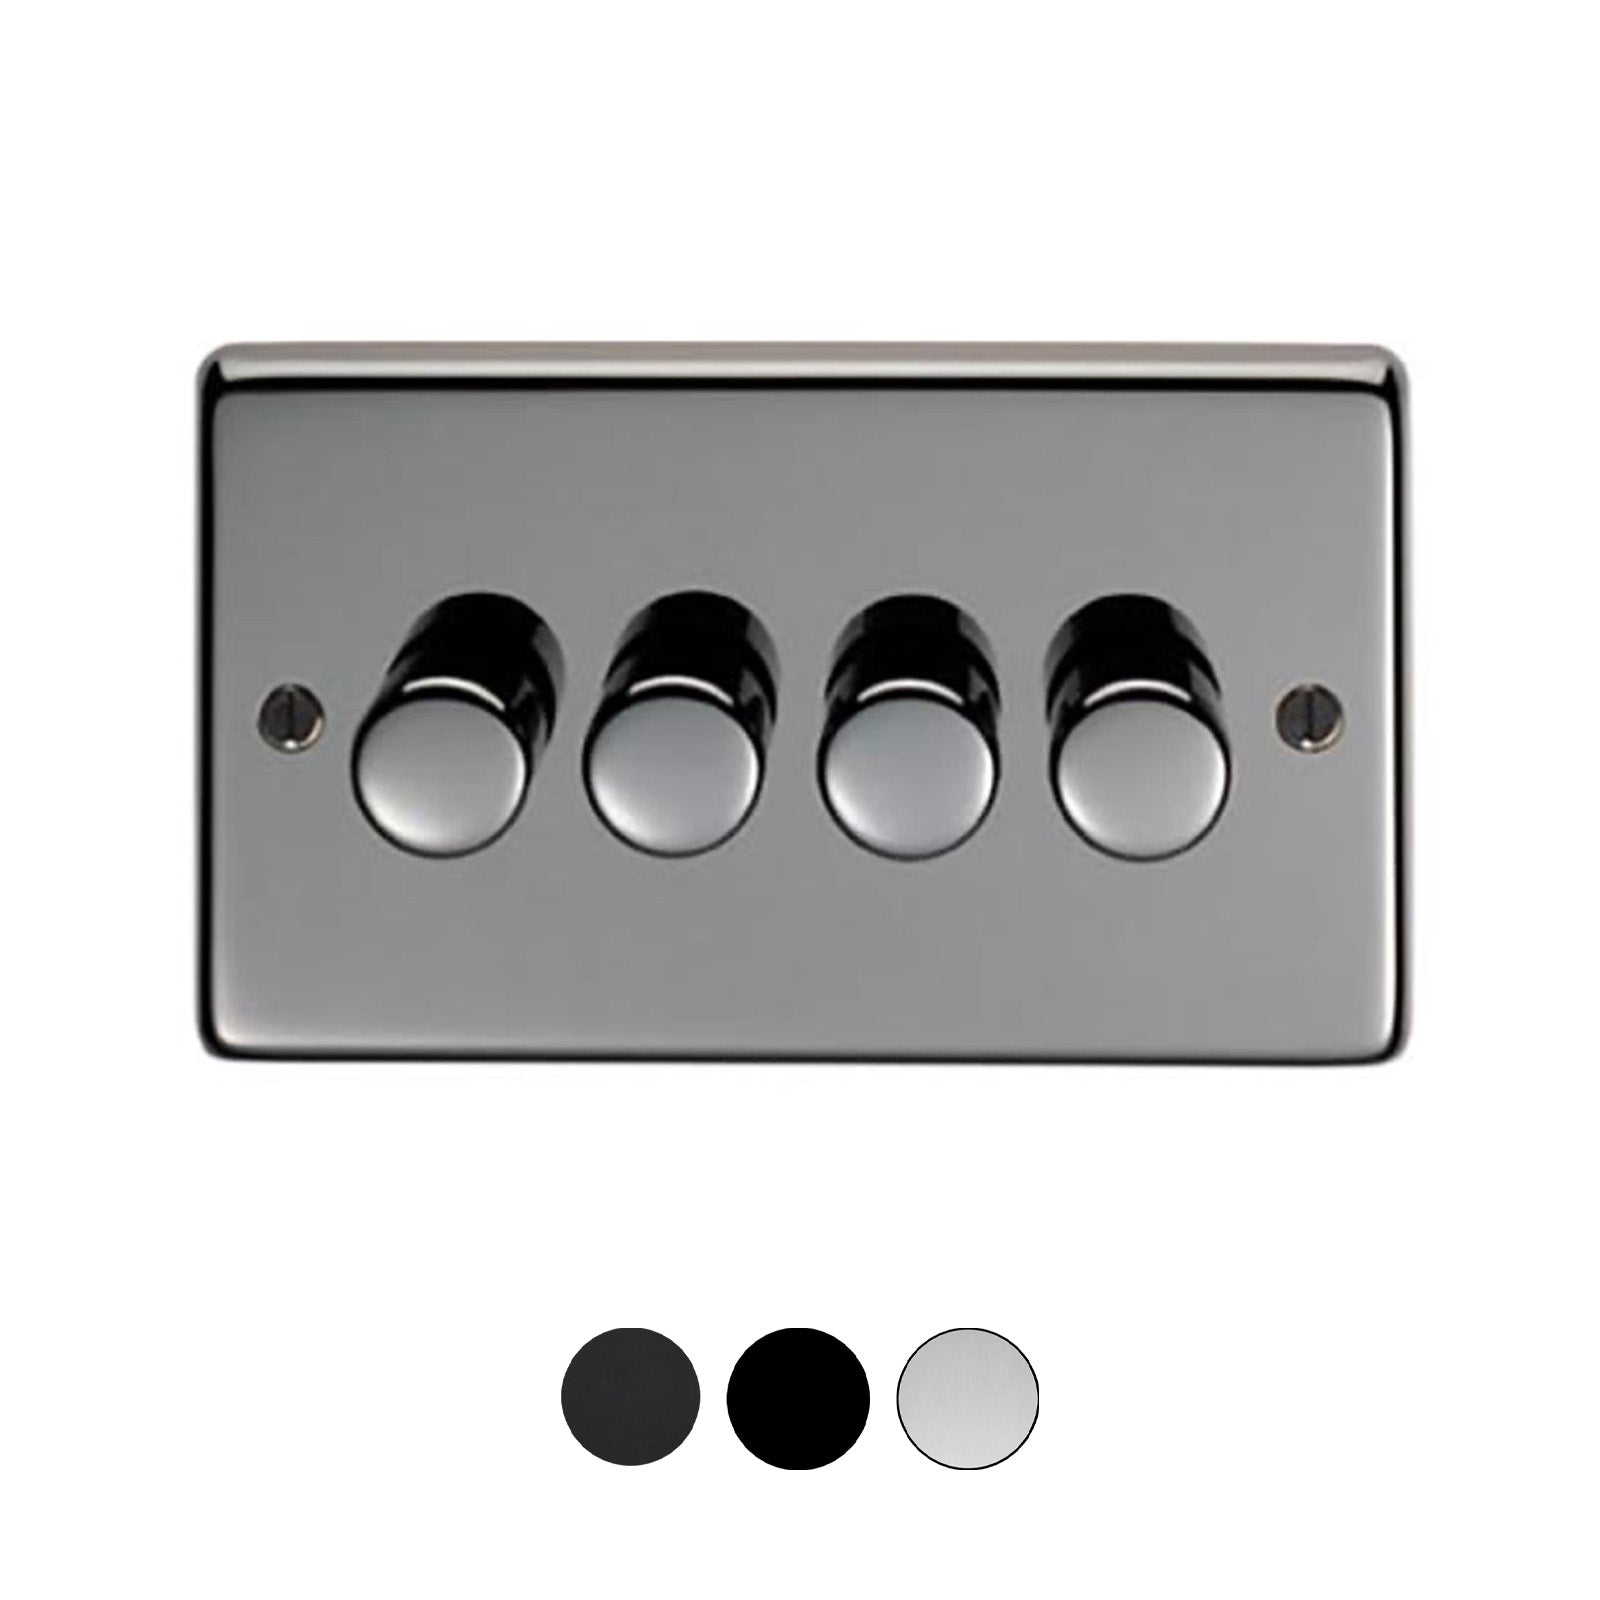 Variant Level Image of Quad LED Dimmer Switch with colour options